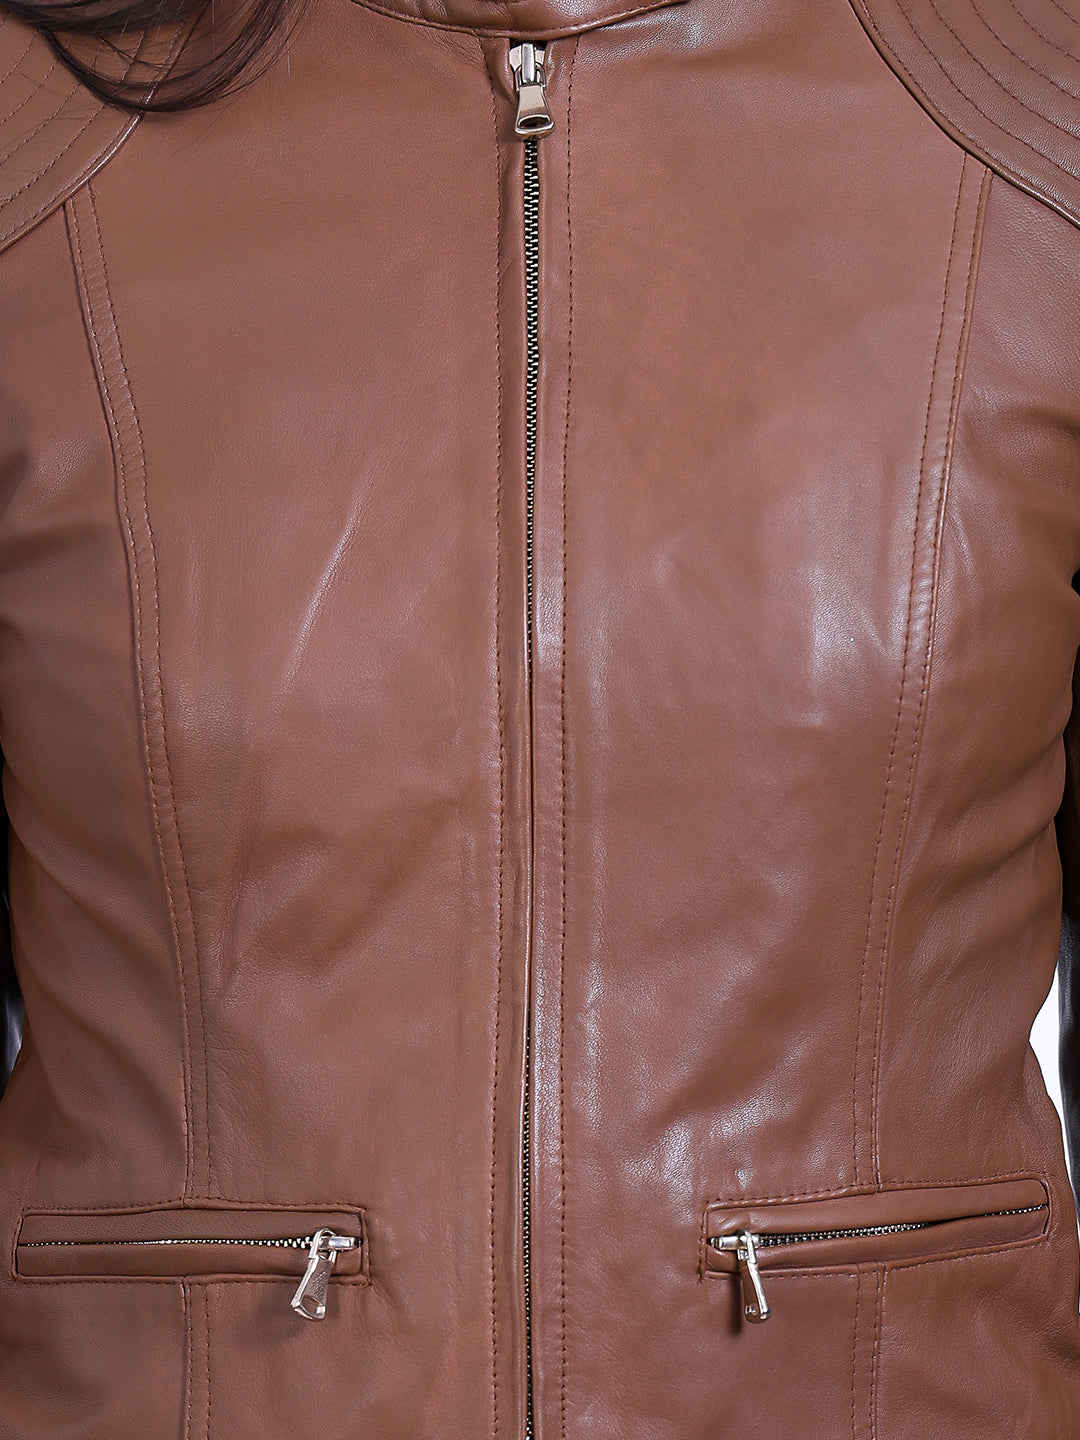 Justanned Hickory Natural Leather Jacket